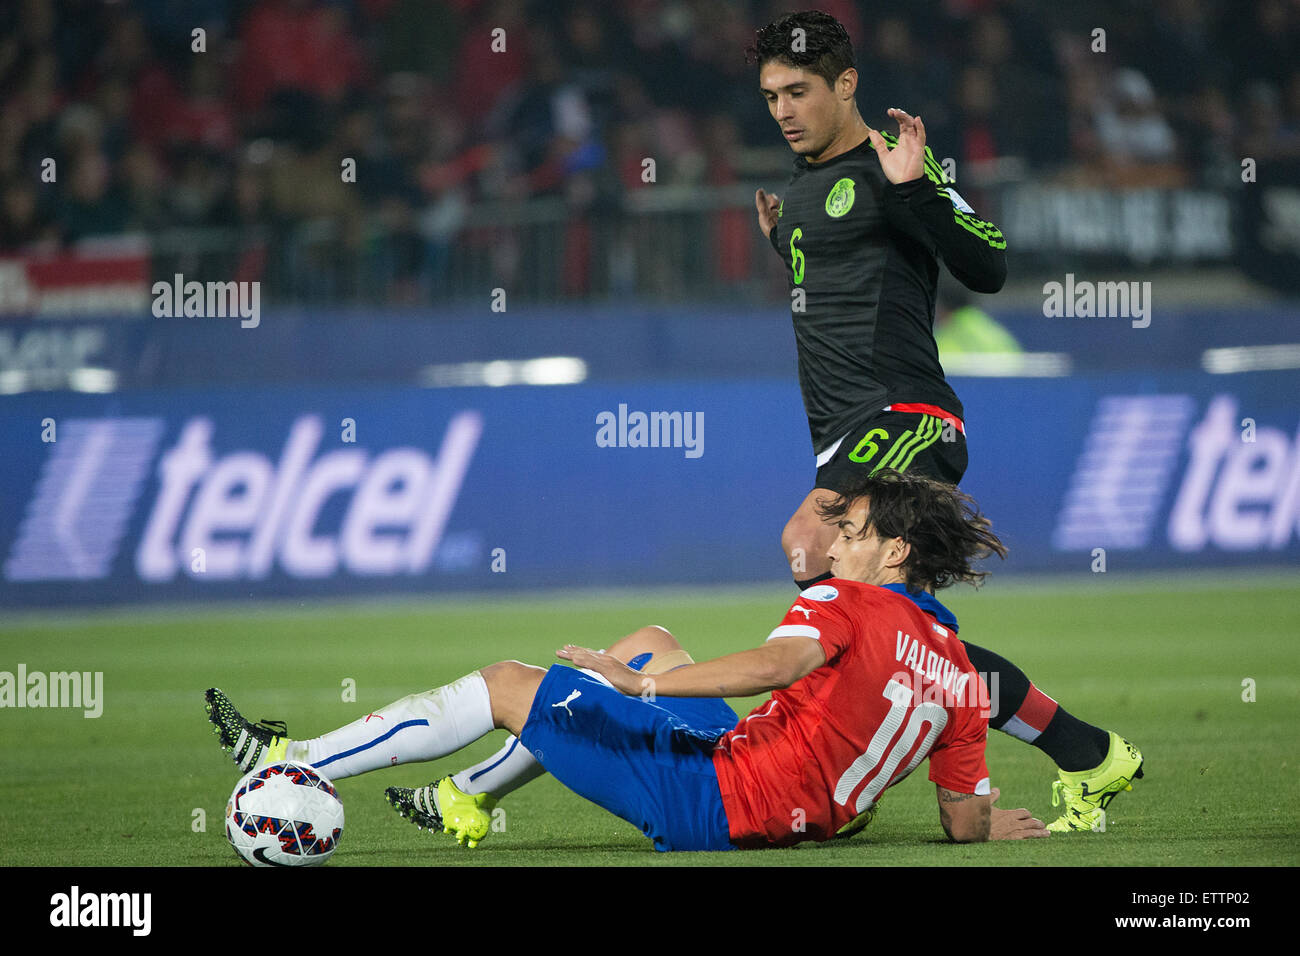 Santiago, Chile. 15th June, 2015. Jorge Valdivia (Bottom) of Chile vies for the ball with Javier Guemez of Mexico during the the Group A match of the Copa America 2015, at the National Stadium, in Santiago, Chile, on June 15, 2015. The match ended with a 3-3 draw. Credit:  Pedro Mera/Xinhua/Alamy Live News Stock Photo